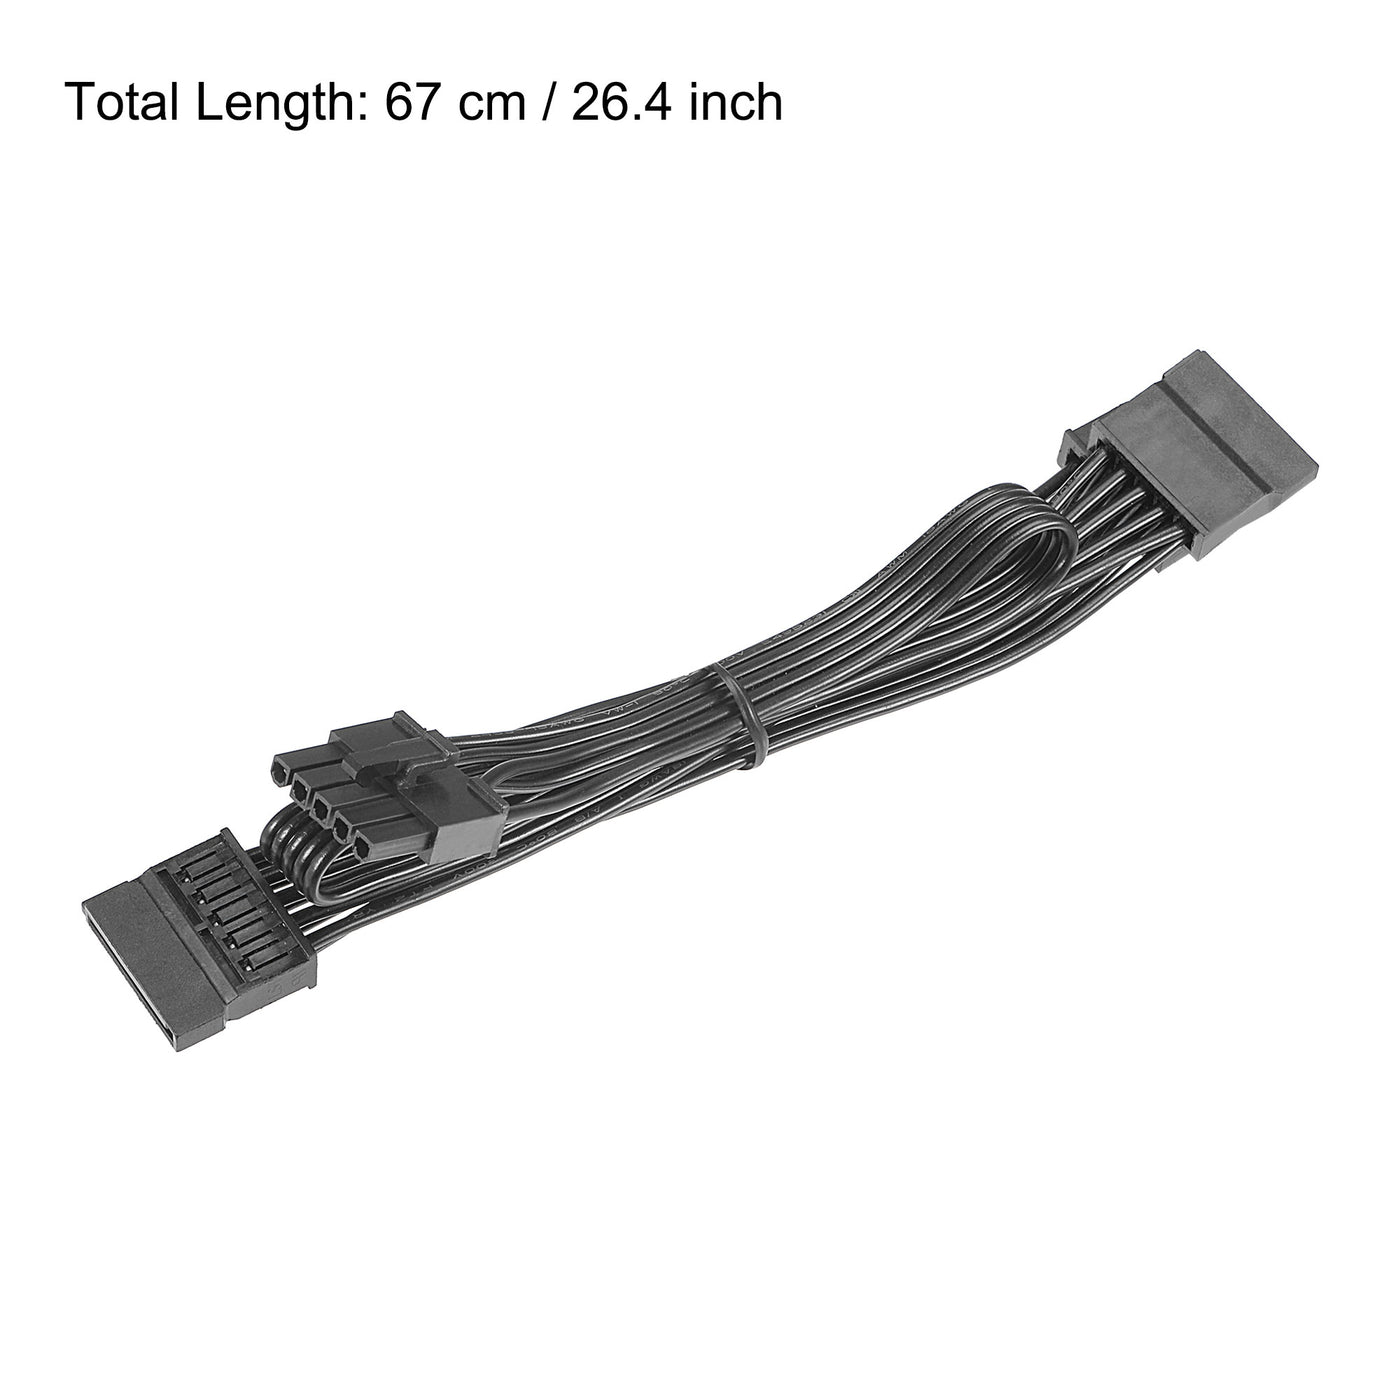 uxcell Uxcell Mainboard Power Cable for Video Card PCIe 5 to 3 Splitter SATA 18 AWG 67cm